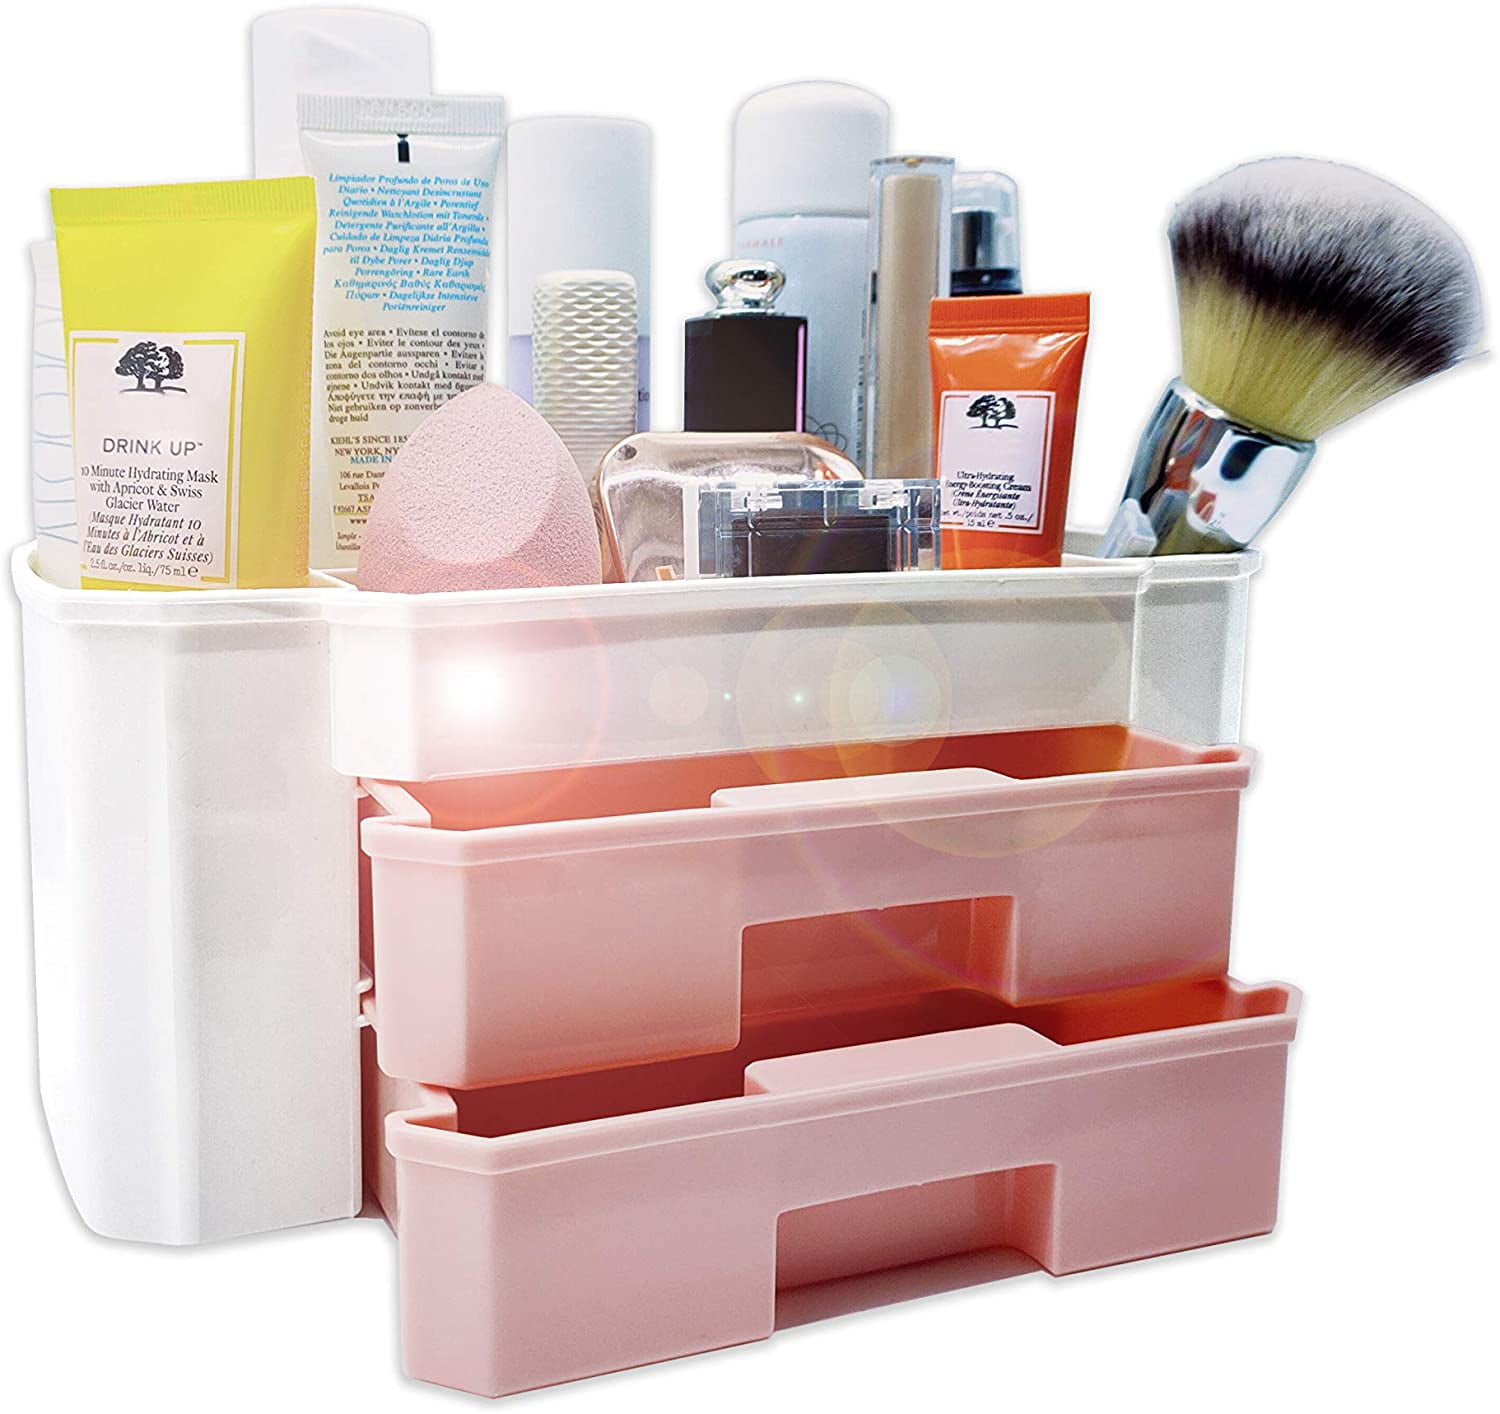 Cosmetic Storage Box, 1pc Rabbit Decor Multi-Use Makeup Organizer With  Drawers, Countertop Organizer For Cosmetics, Vanity Holder For Lipstick,  Brushes, Eyeshadow, Nail Polish And Jewelry, Desk Organizer For Dresser,  Bathroom, Vanity